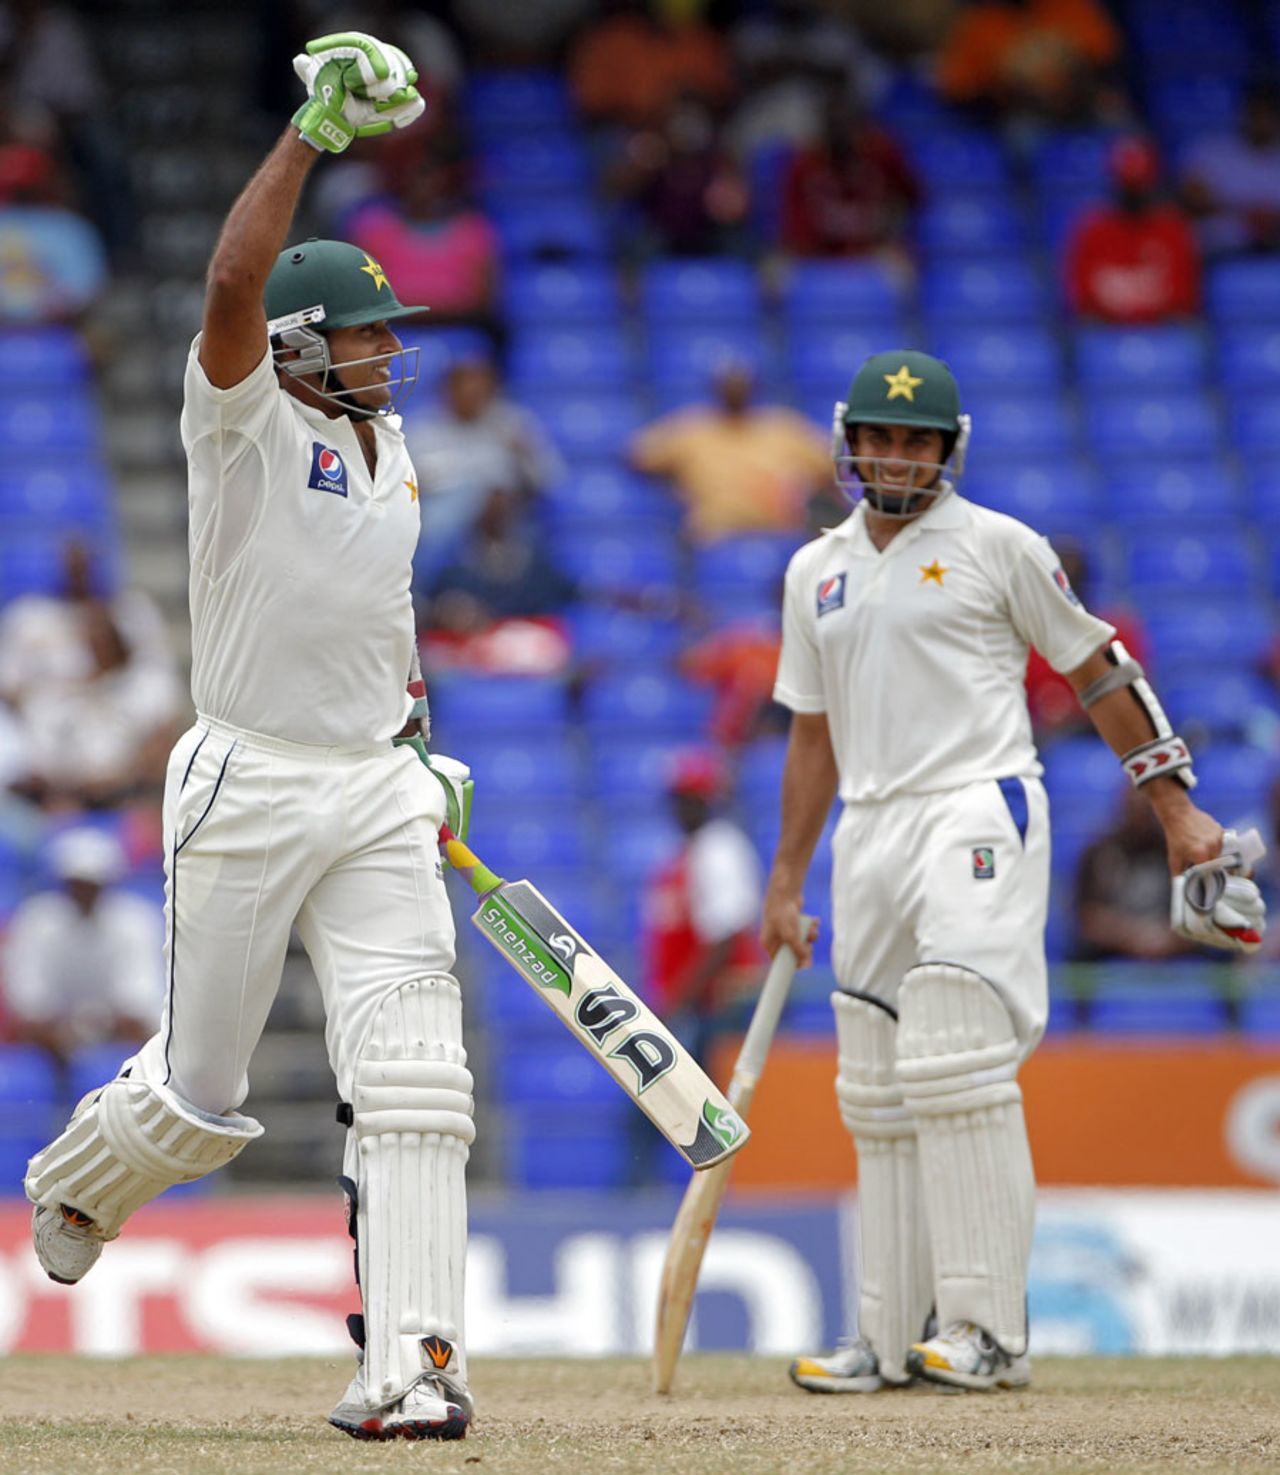 Tanvir Ahmed celebrates his maiden Test fifty, West Indies v Pakistan, 2nd Test, St Kitts, 2nd day, May 21, 2011